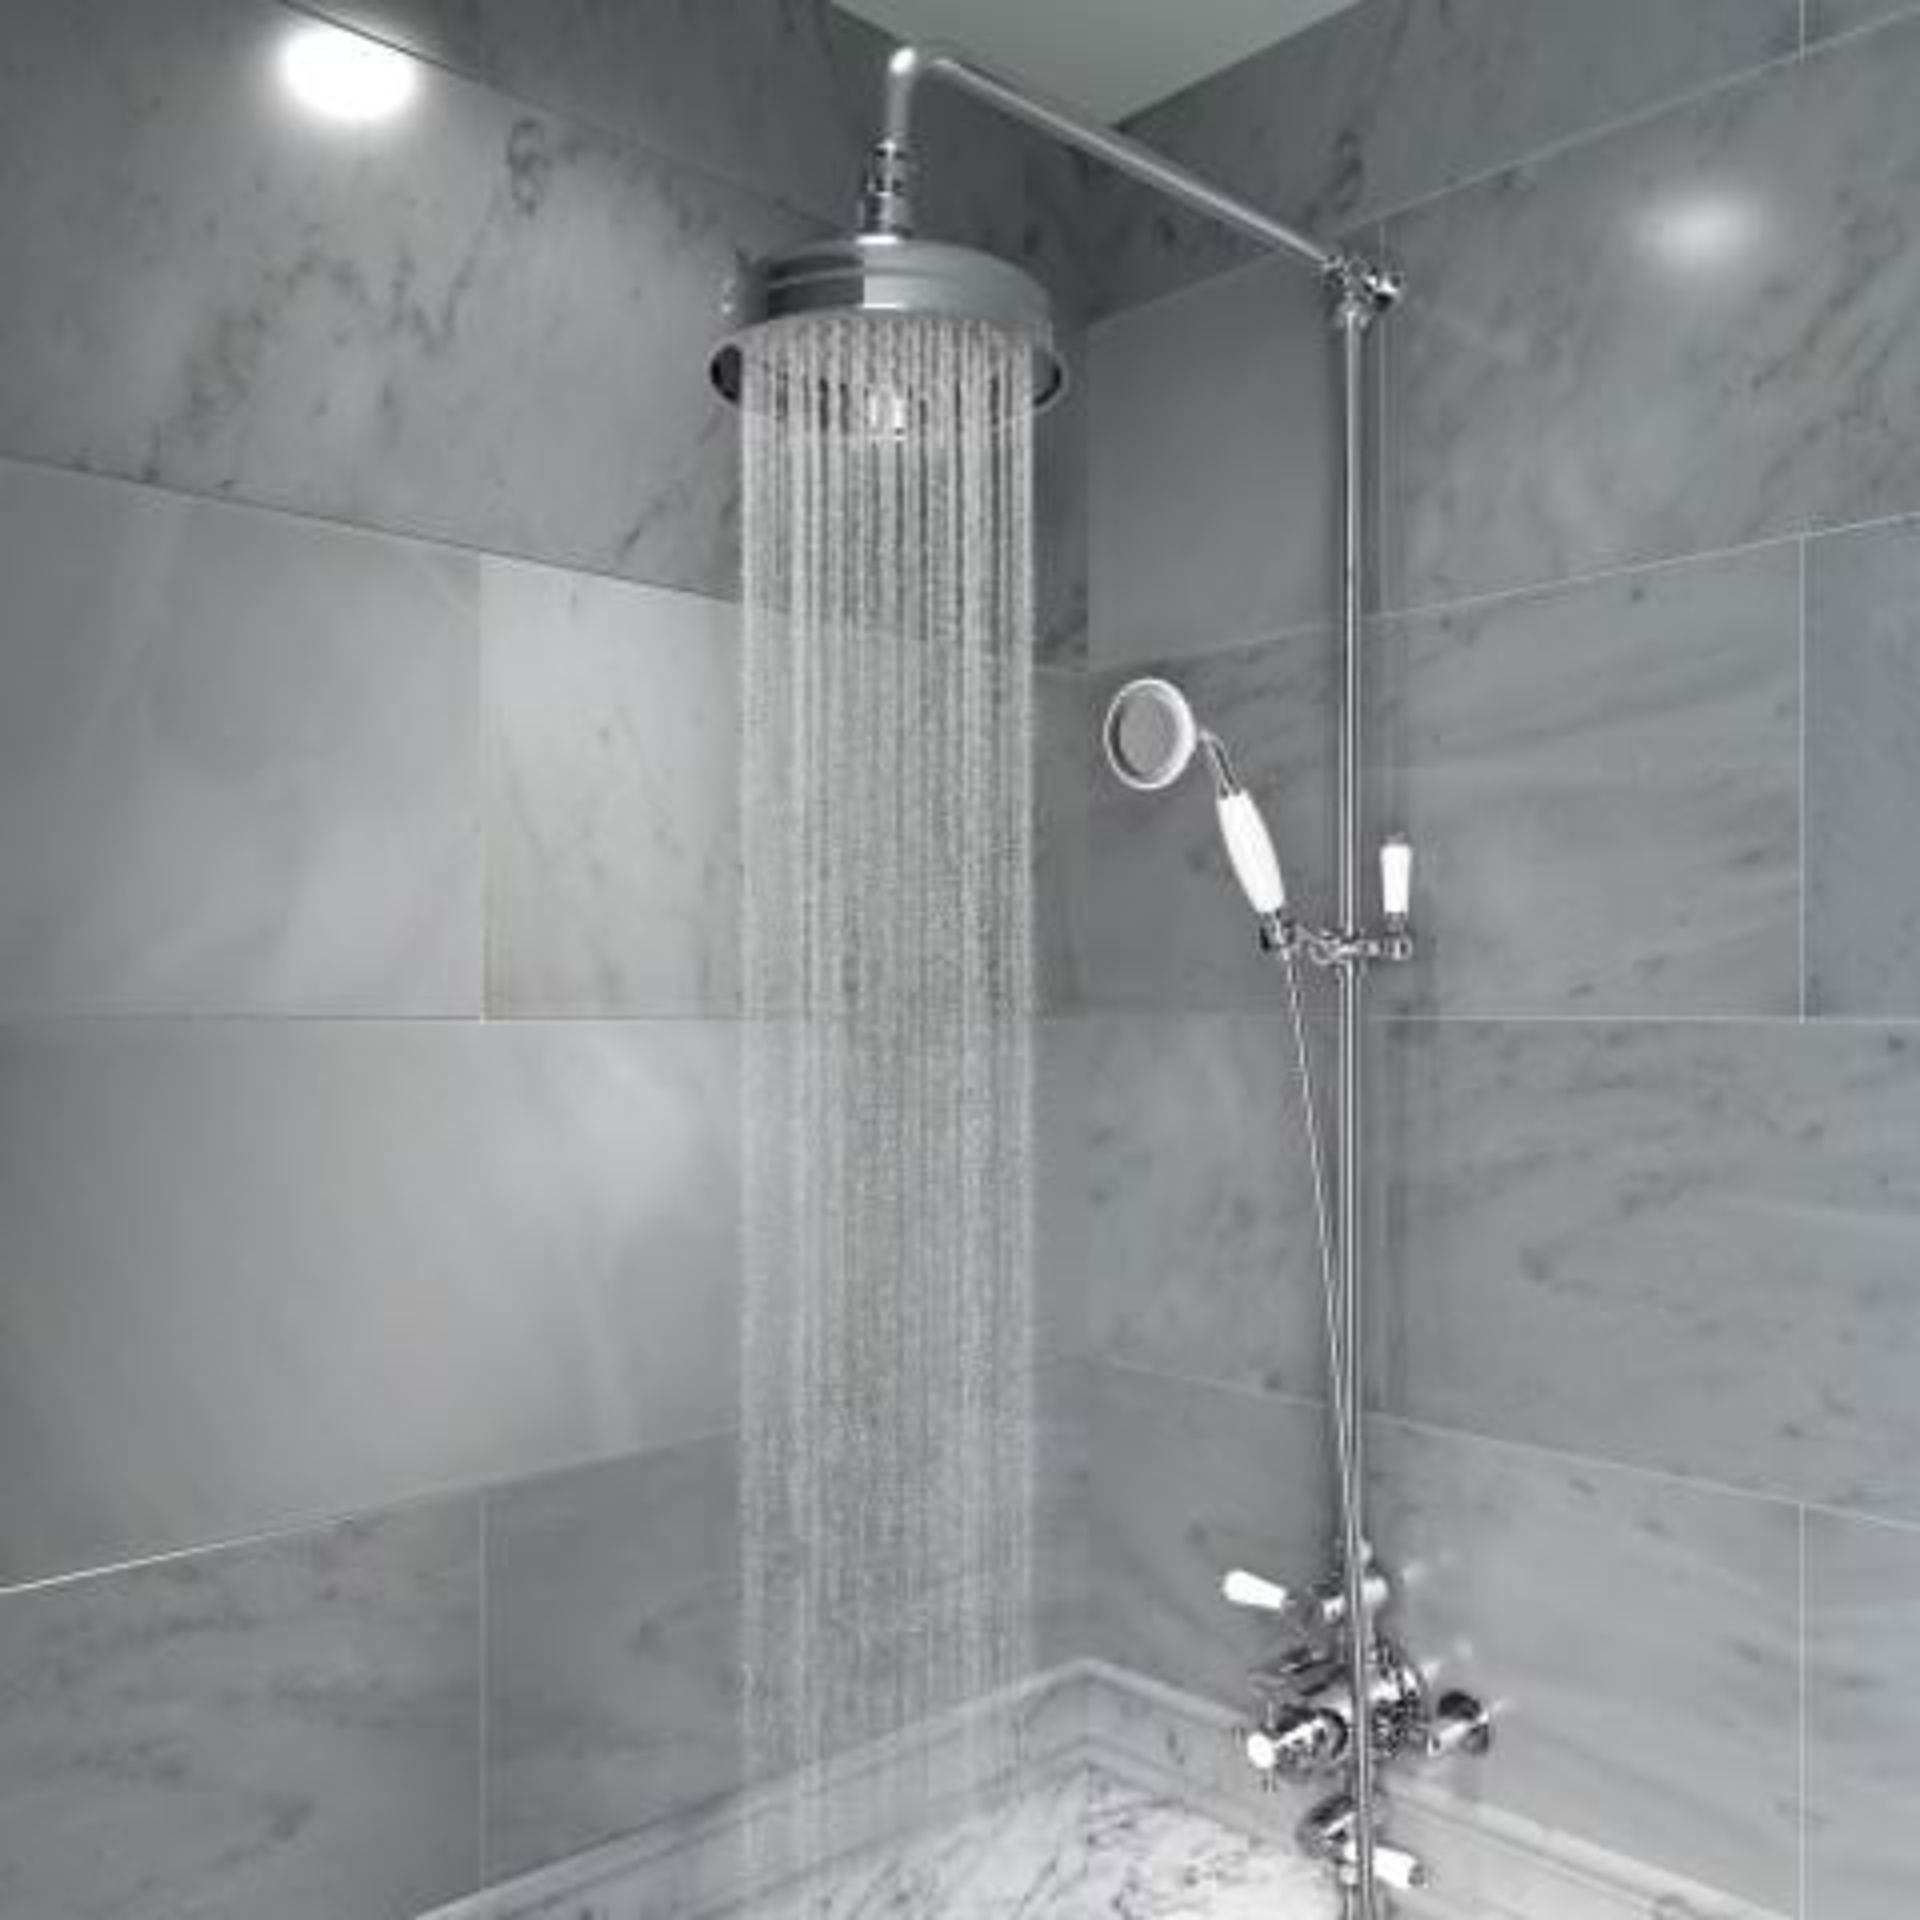 (A33) 200mm Finest Head Thermostatic Traditional Exposed Shower Kit & Handheld. RRP £599.99. We take